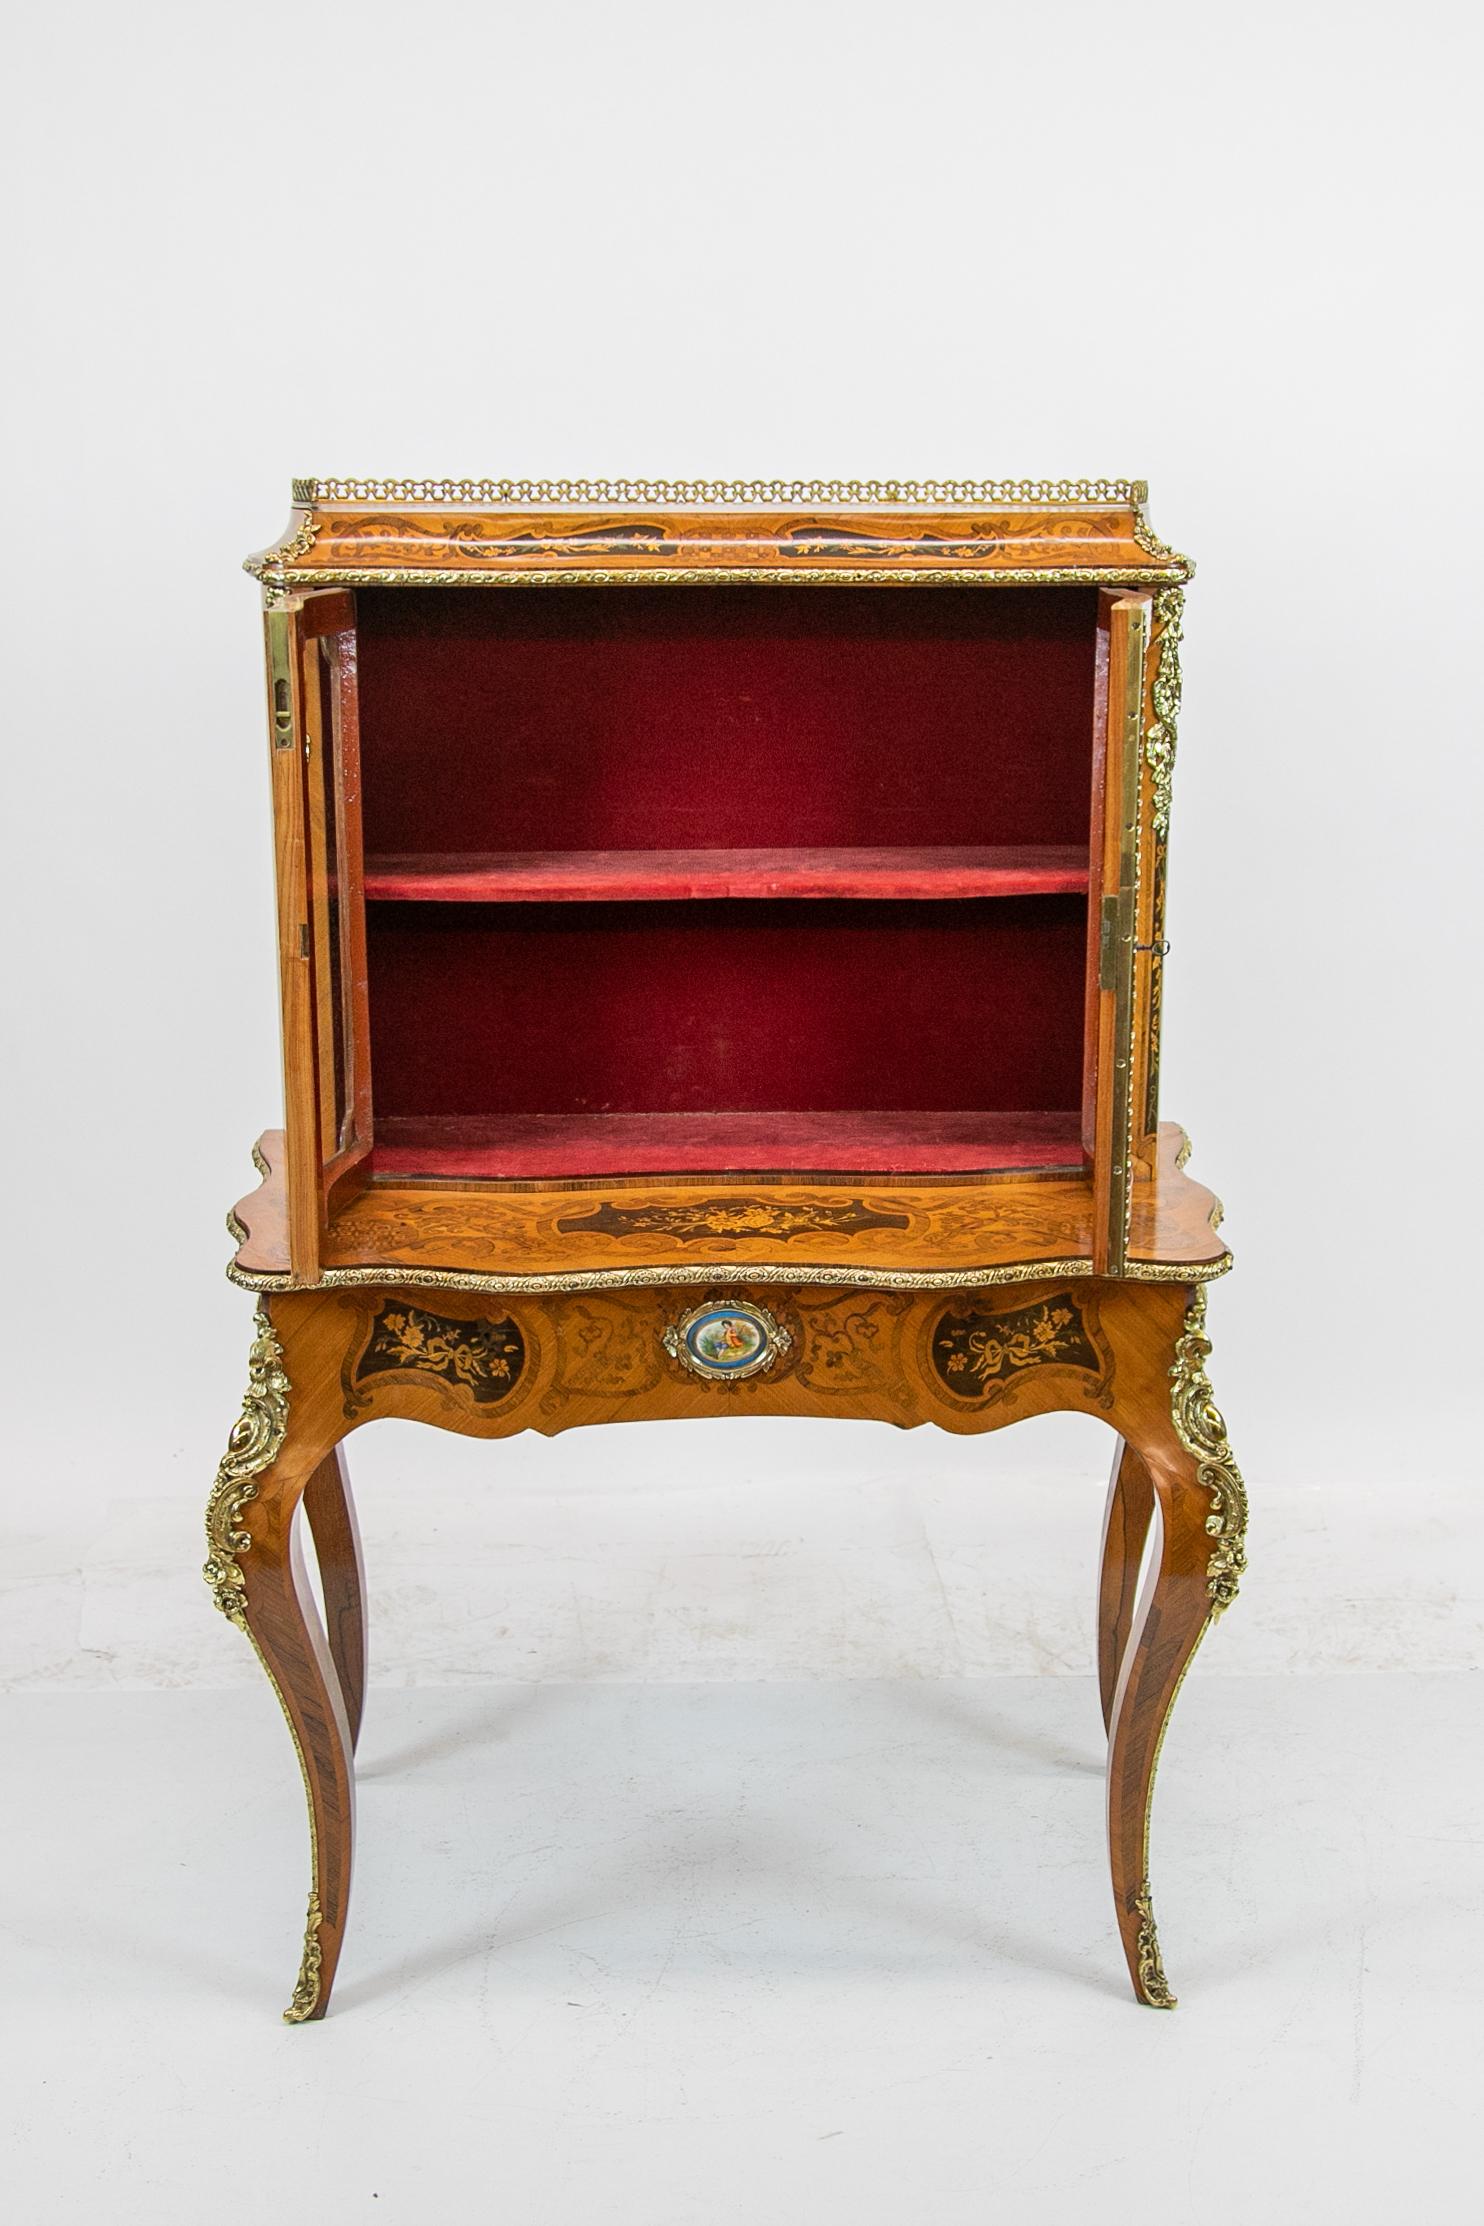 French Serpentine Marquetry Inlaid Display Cabinet For Sale 8